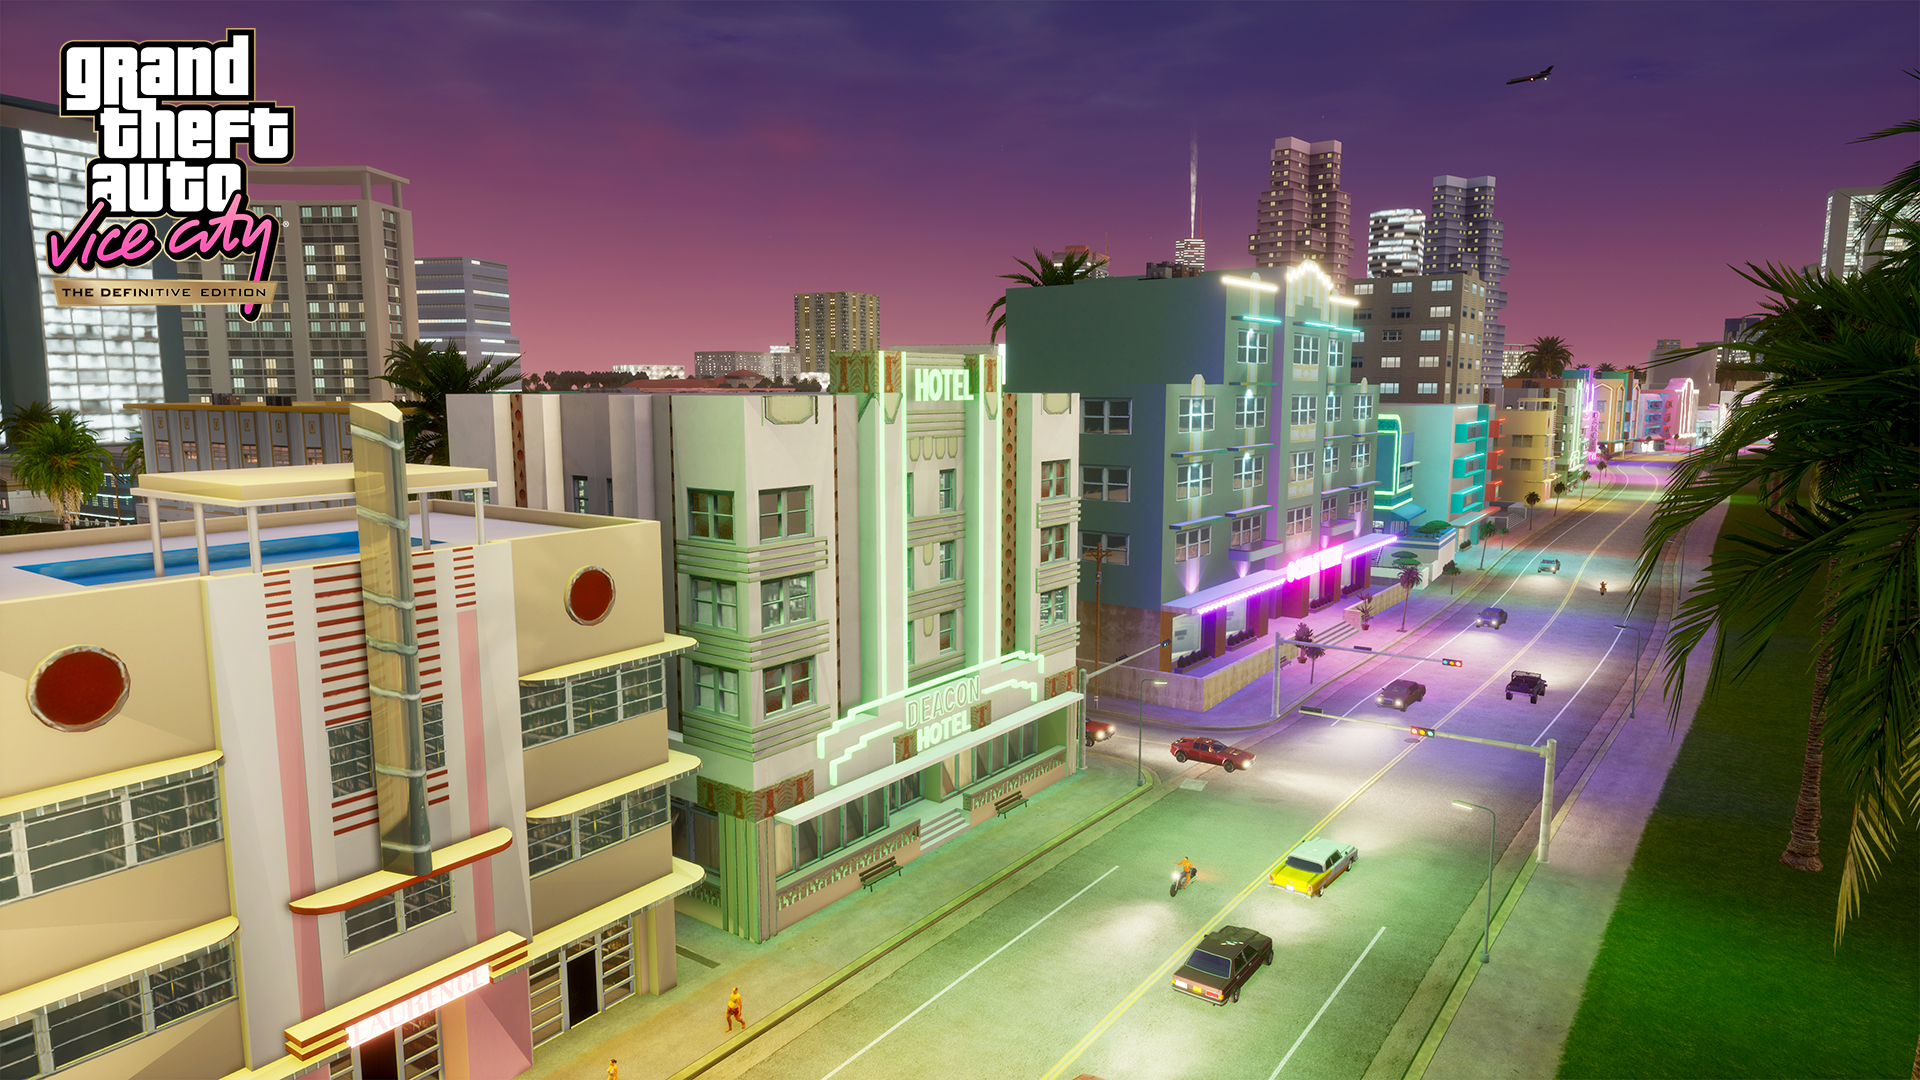 Gta Trilogy Definitive Edition Graphics Revealed As Not That